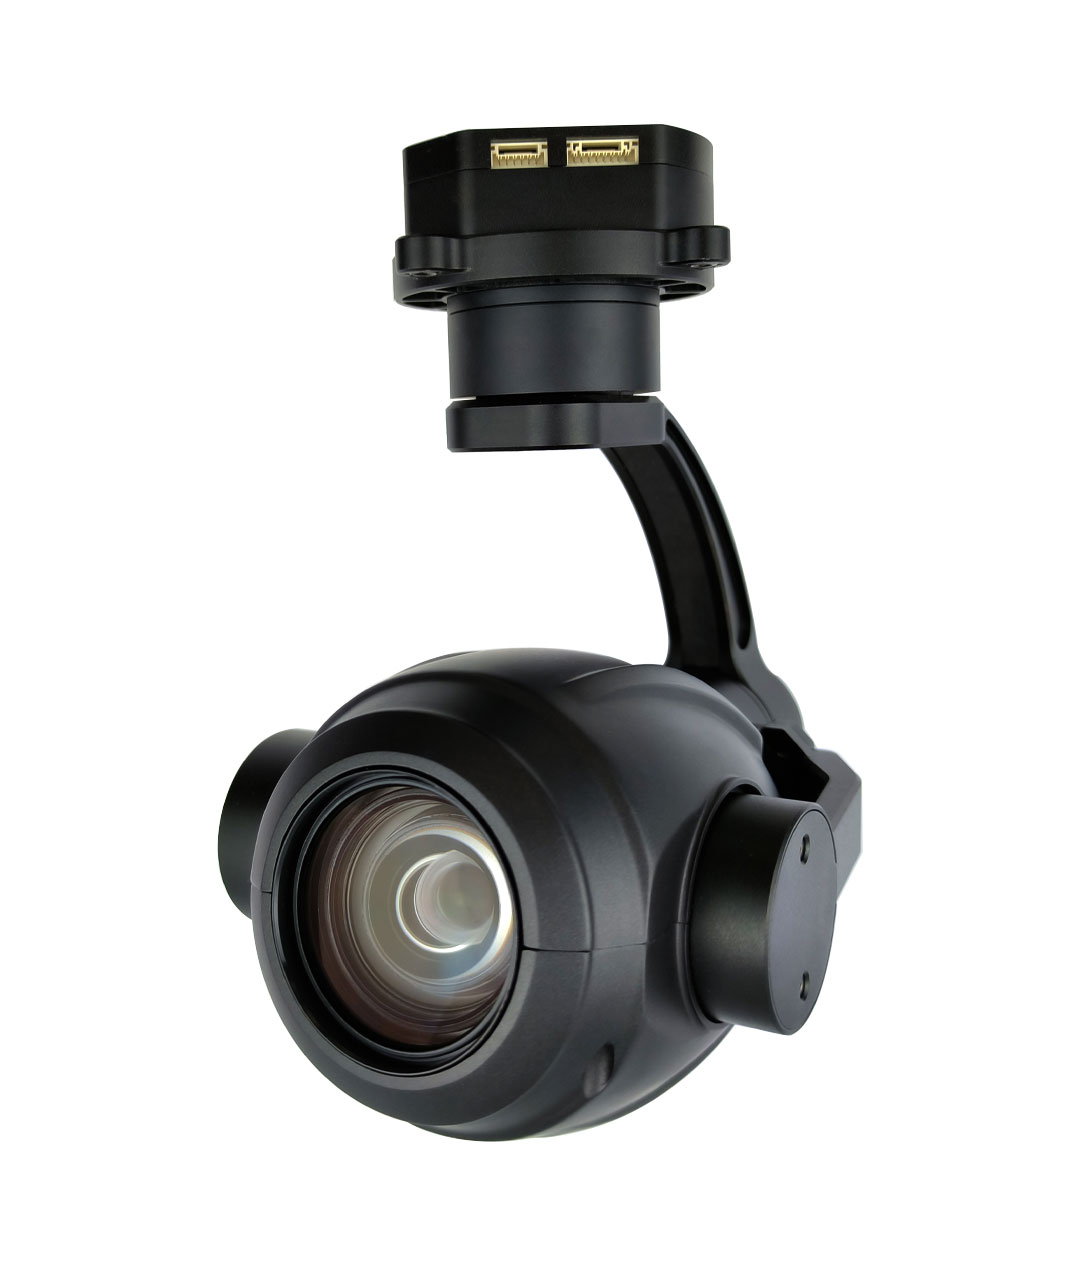 TOPOTEK KHP20S78 Gimbal Camera - 20x Optical Zoom + Starlight Night Vision Camera with 3-Axis Gimbal With Ethernet/HDMI Output for UAV Drone